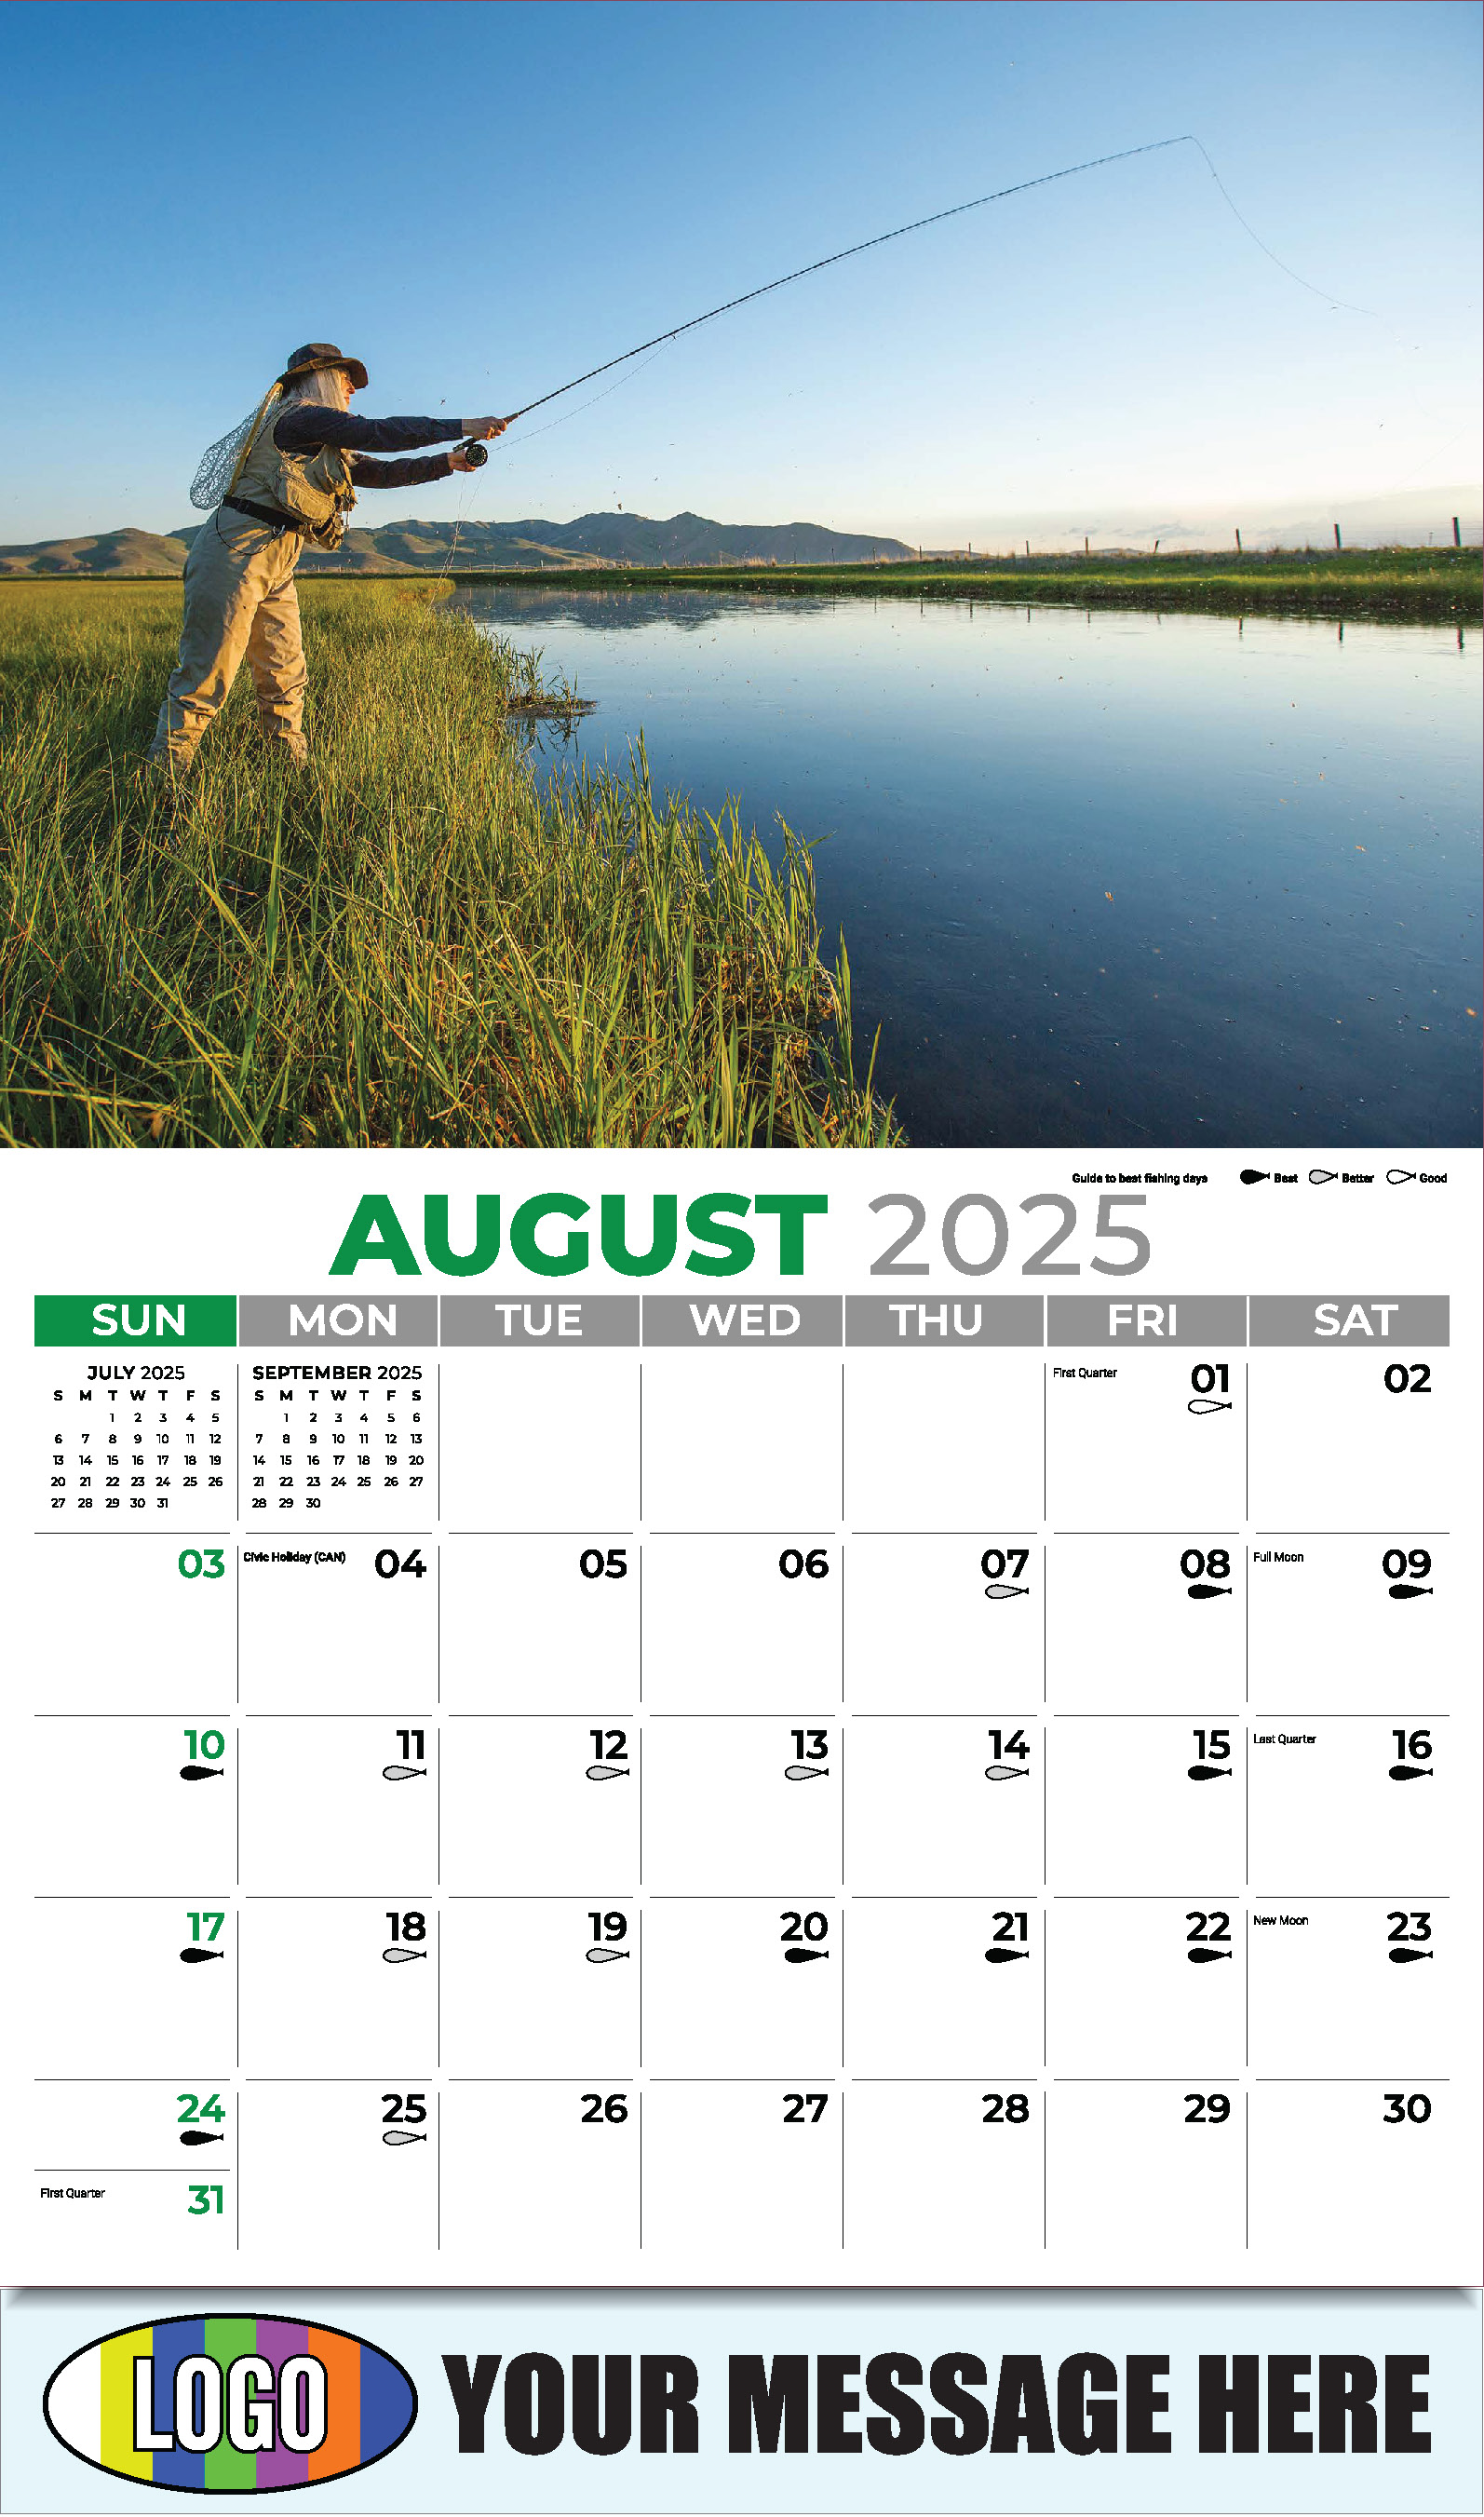 Fishing and Hunting 2025 Business Promotion Calendar - August